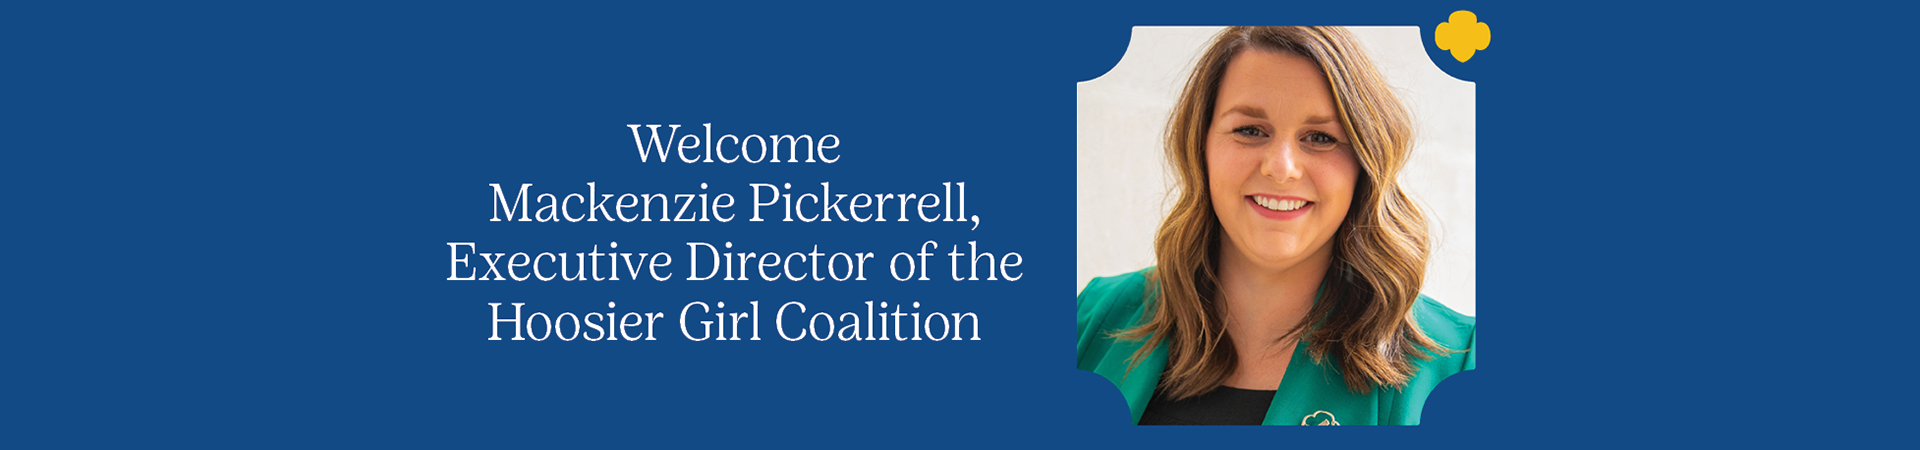  A graphic that states "Welcome Mackenzie Pickerrell, Executive Director of the Hoosier Girl Coalition" with a photo of Mackenzie Pickerrell to the right of the text. 